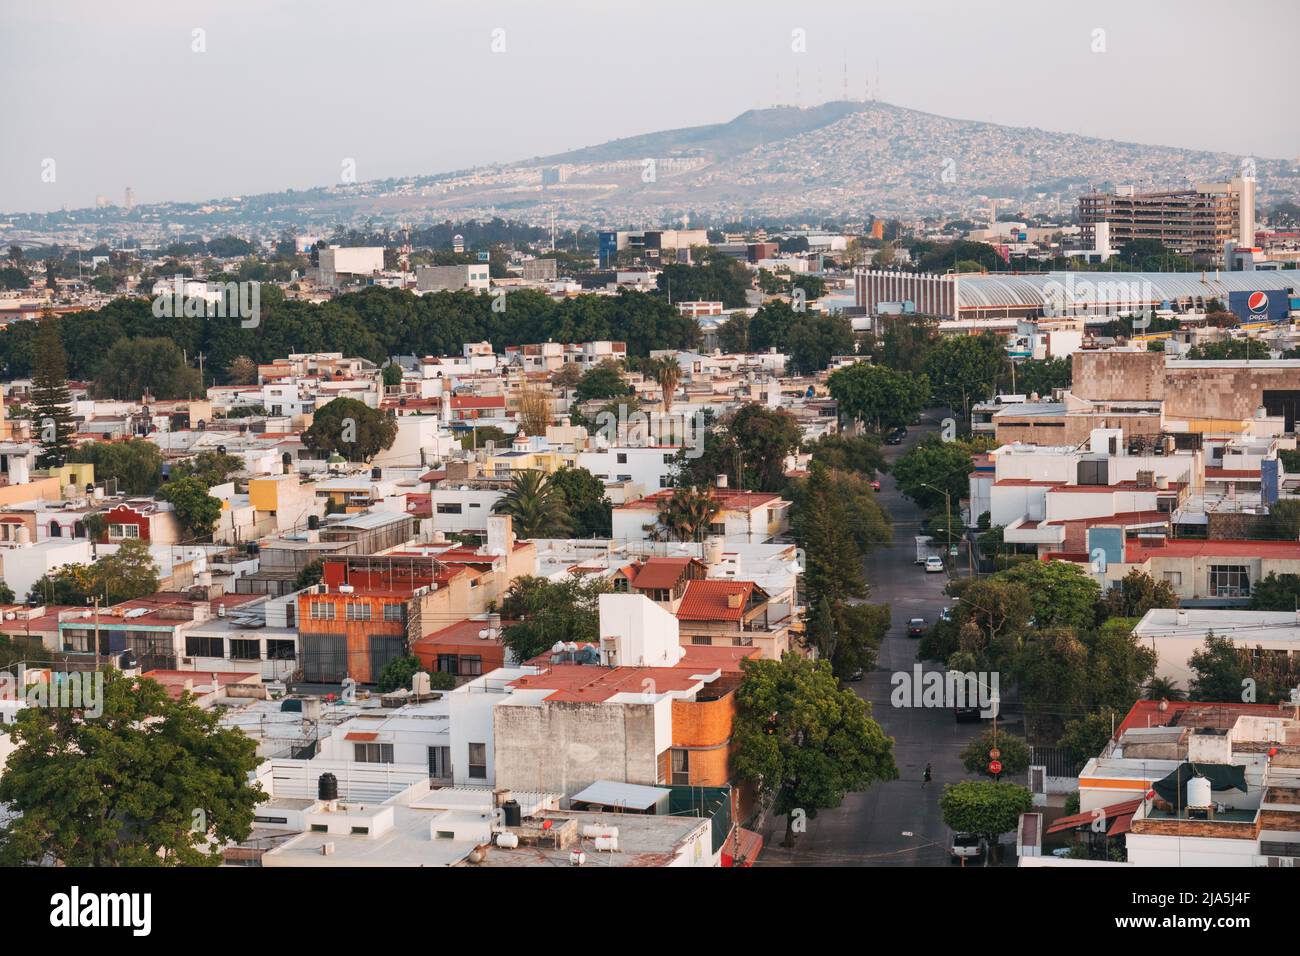 rectangular, concrete homes in the residential suburb of Jardines del Bosque, Guadalajara, Mexico on a peaceful evening Stock Photo